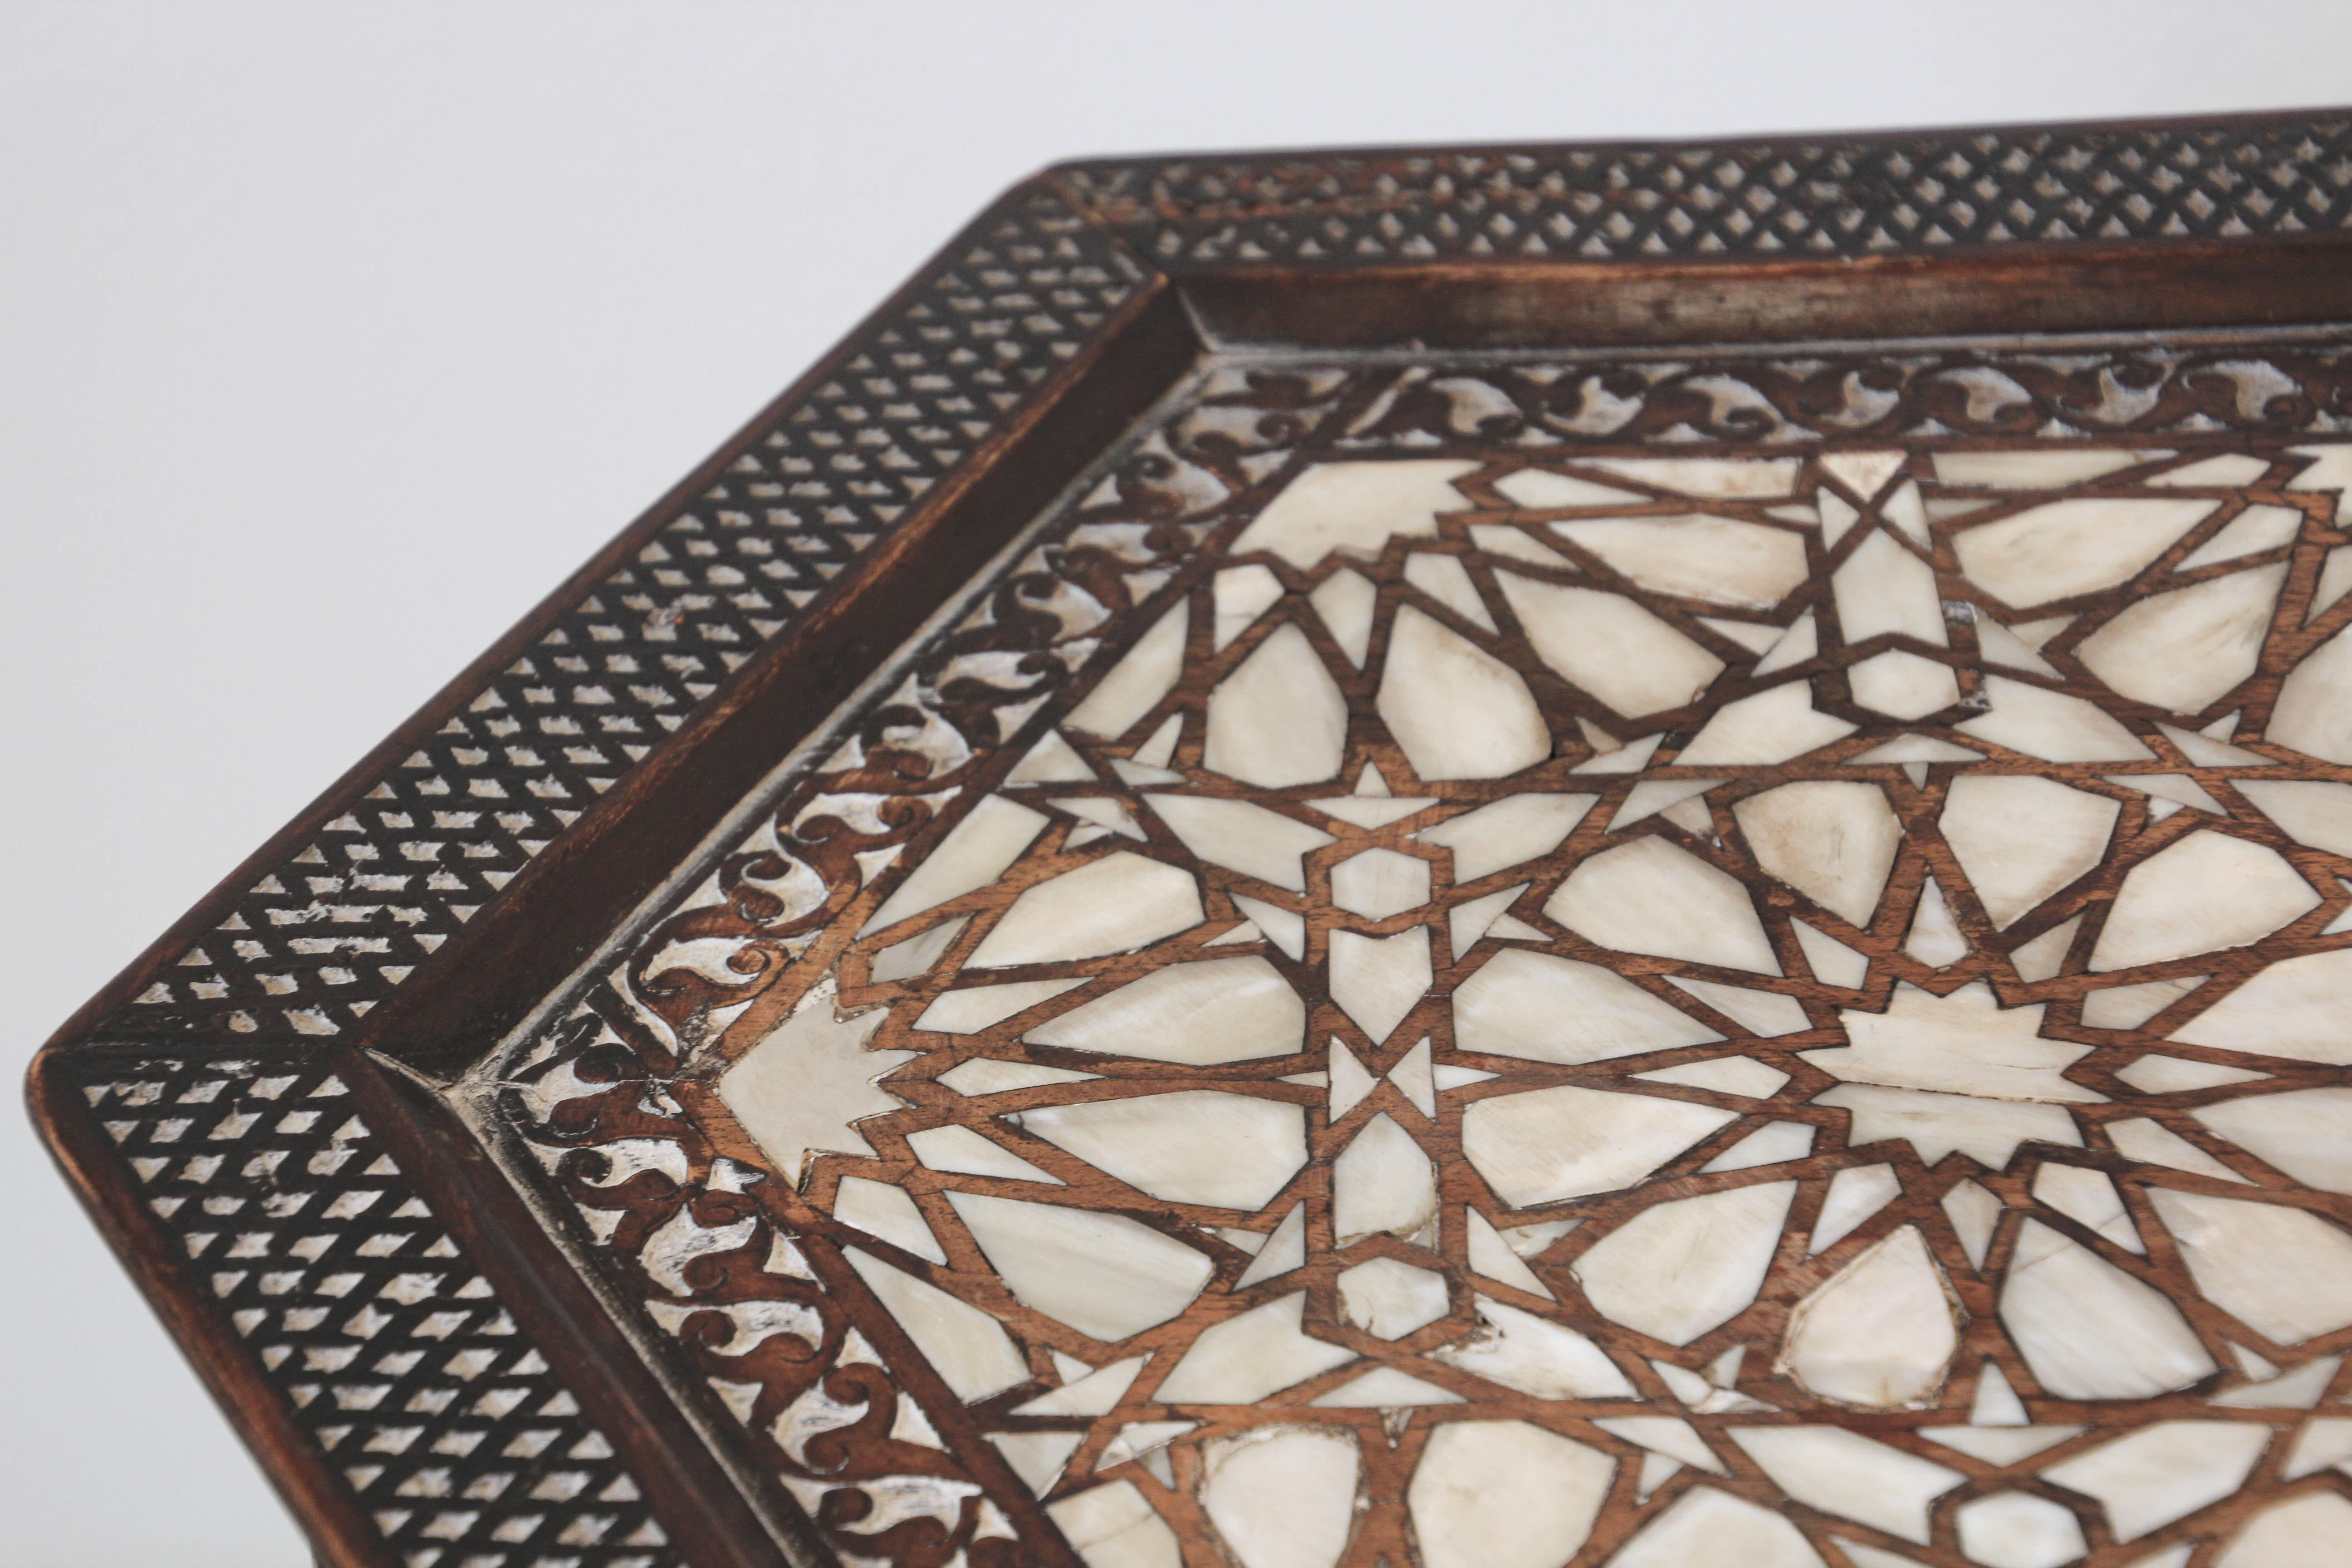 Hand-Carved 19th Century Moorish Mother-of-pearl Inlaid Side Table